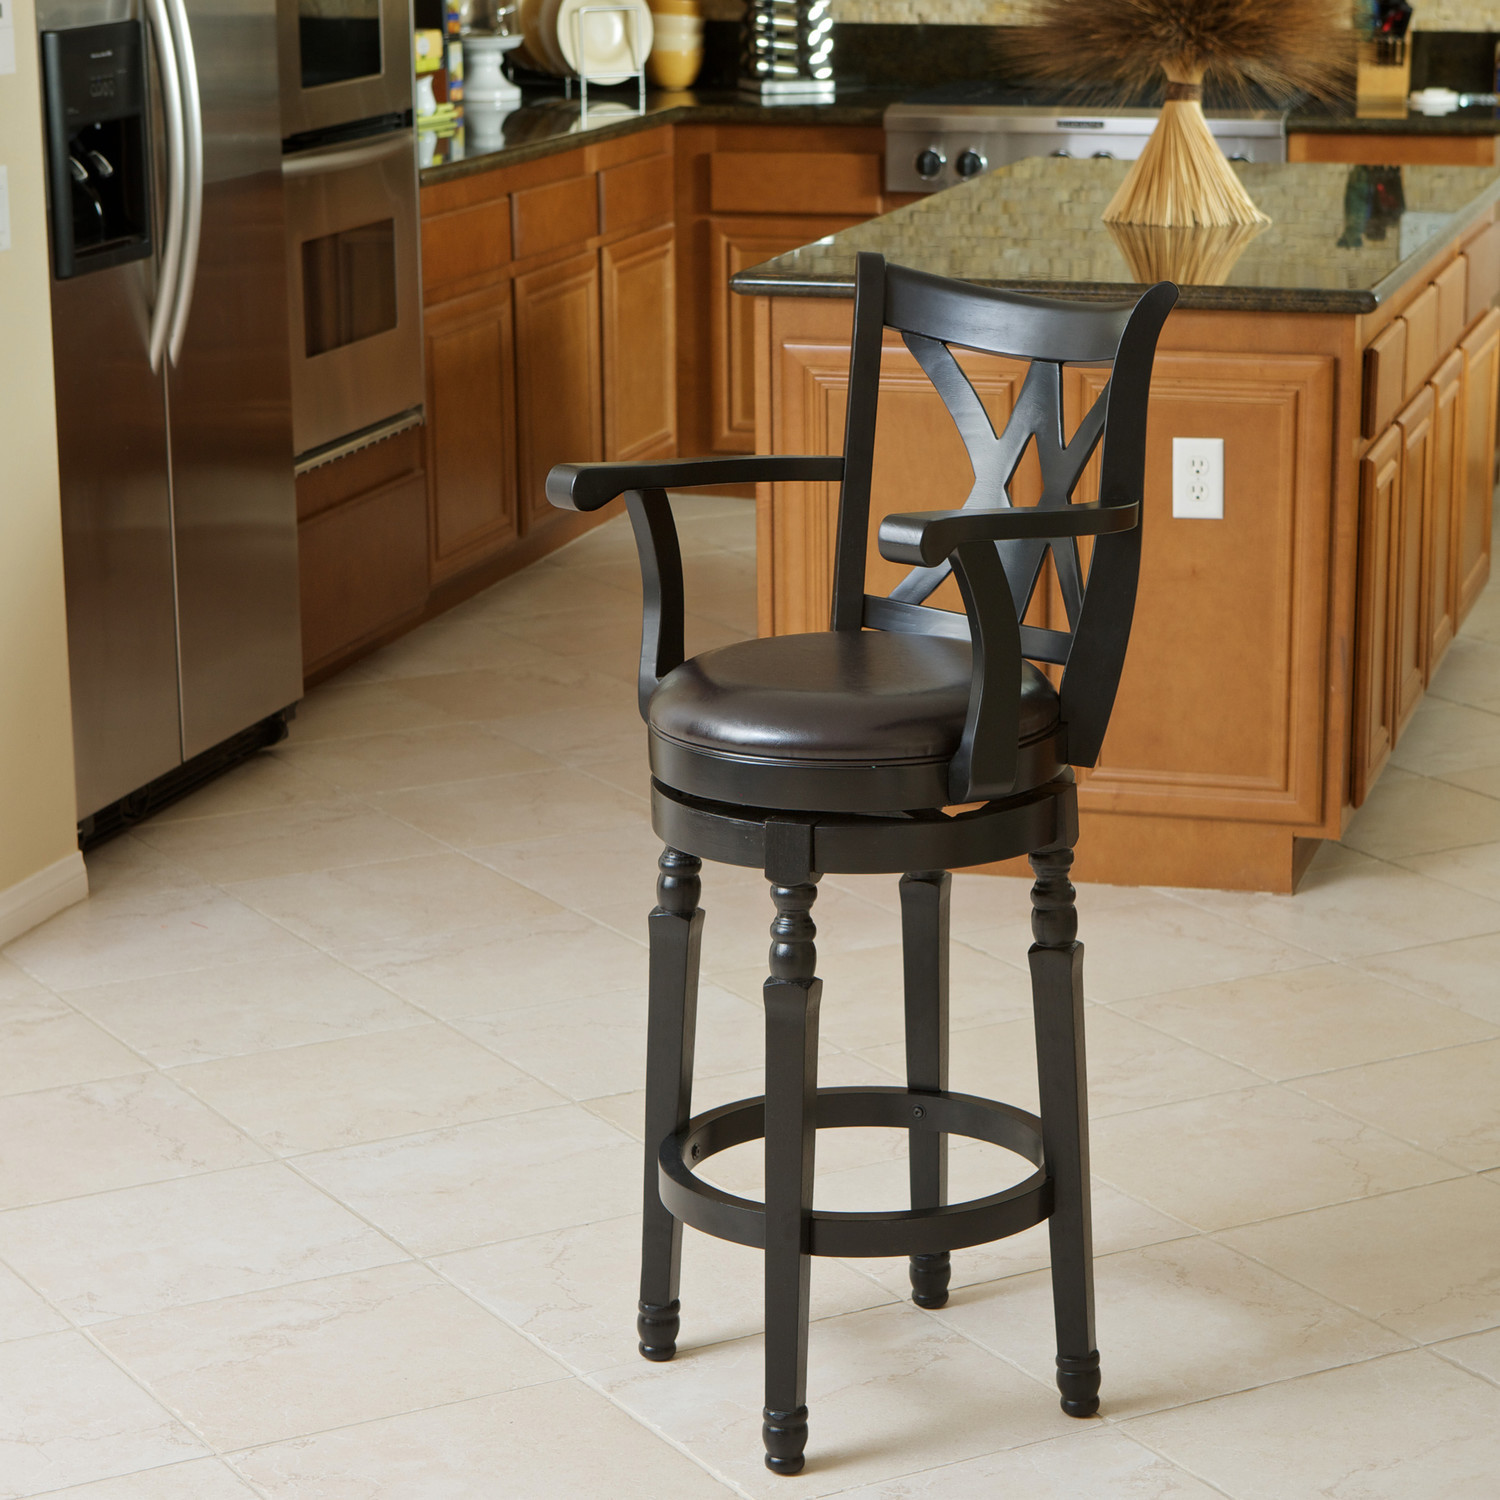 Kitchen Counter Bar Stool Awesome Kitchen Counter Stools with Backs Selection Guide – Homesfeed